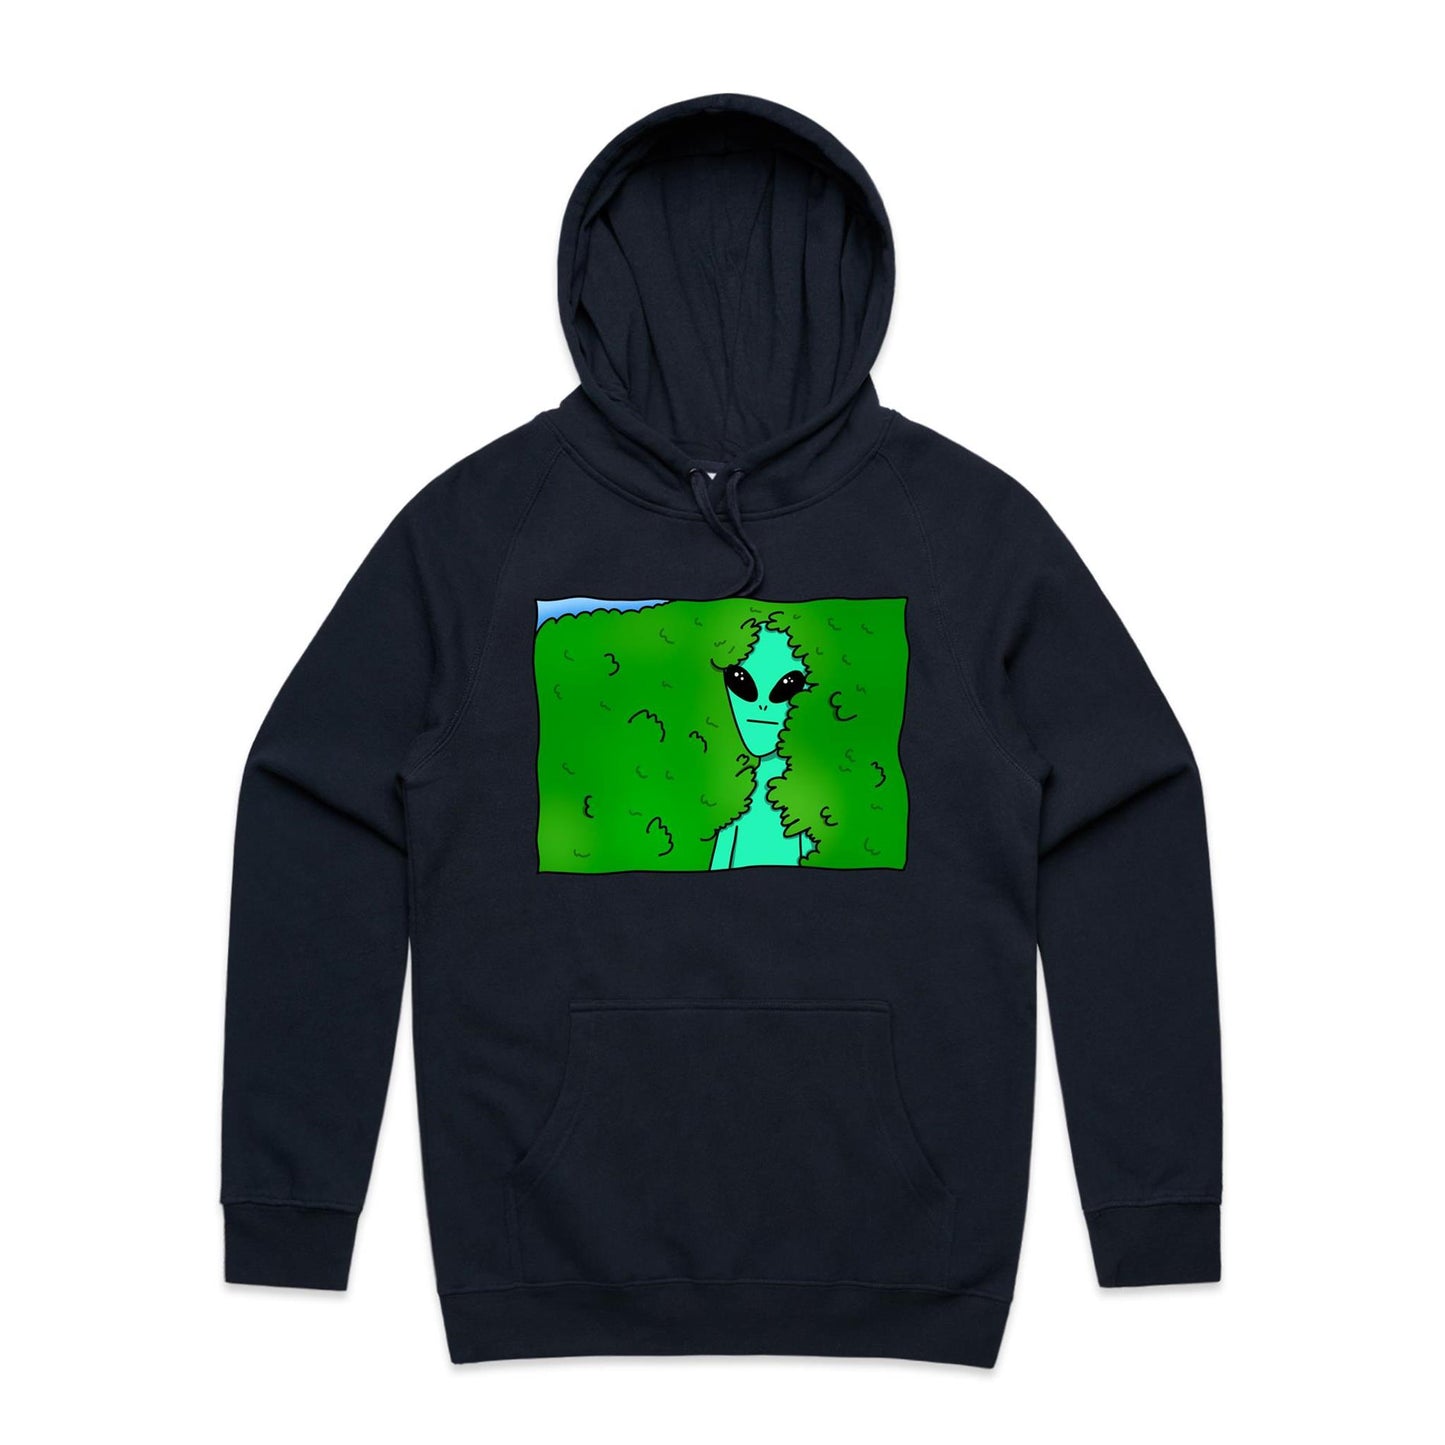 Alien Backing Into Hedge Meme - Supply Hood Navy Mens Supply Hoodie Funny Sci Fi